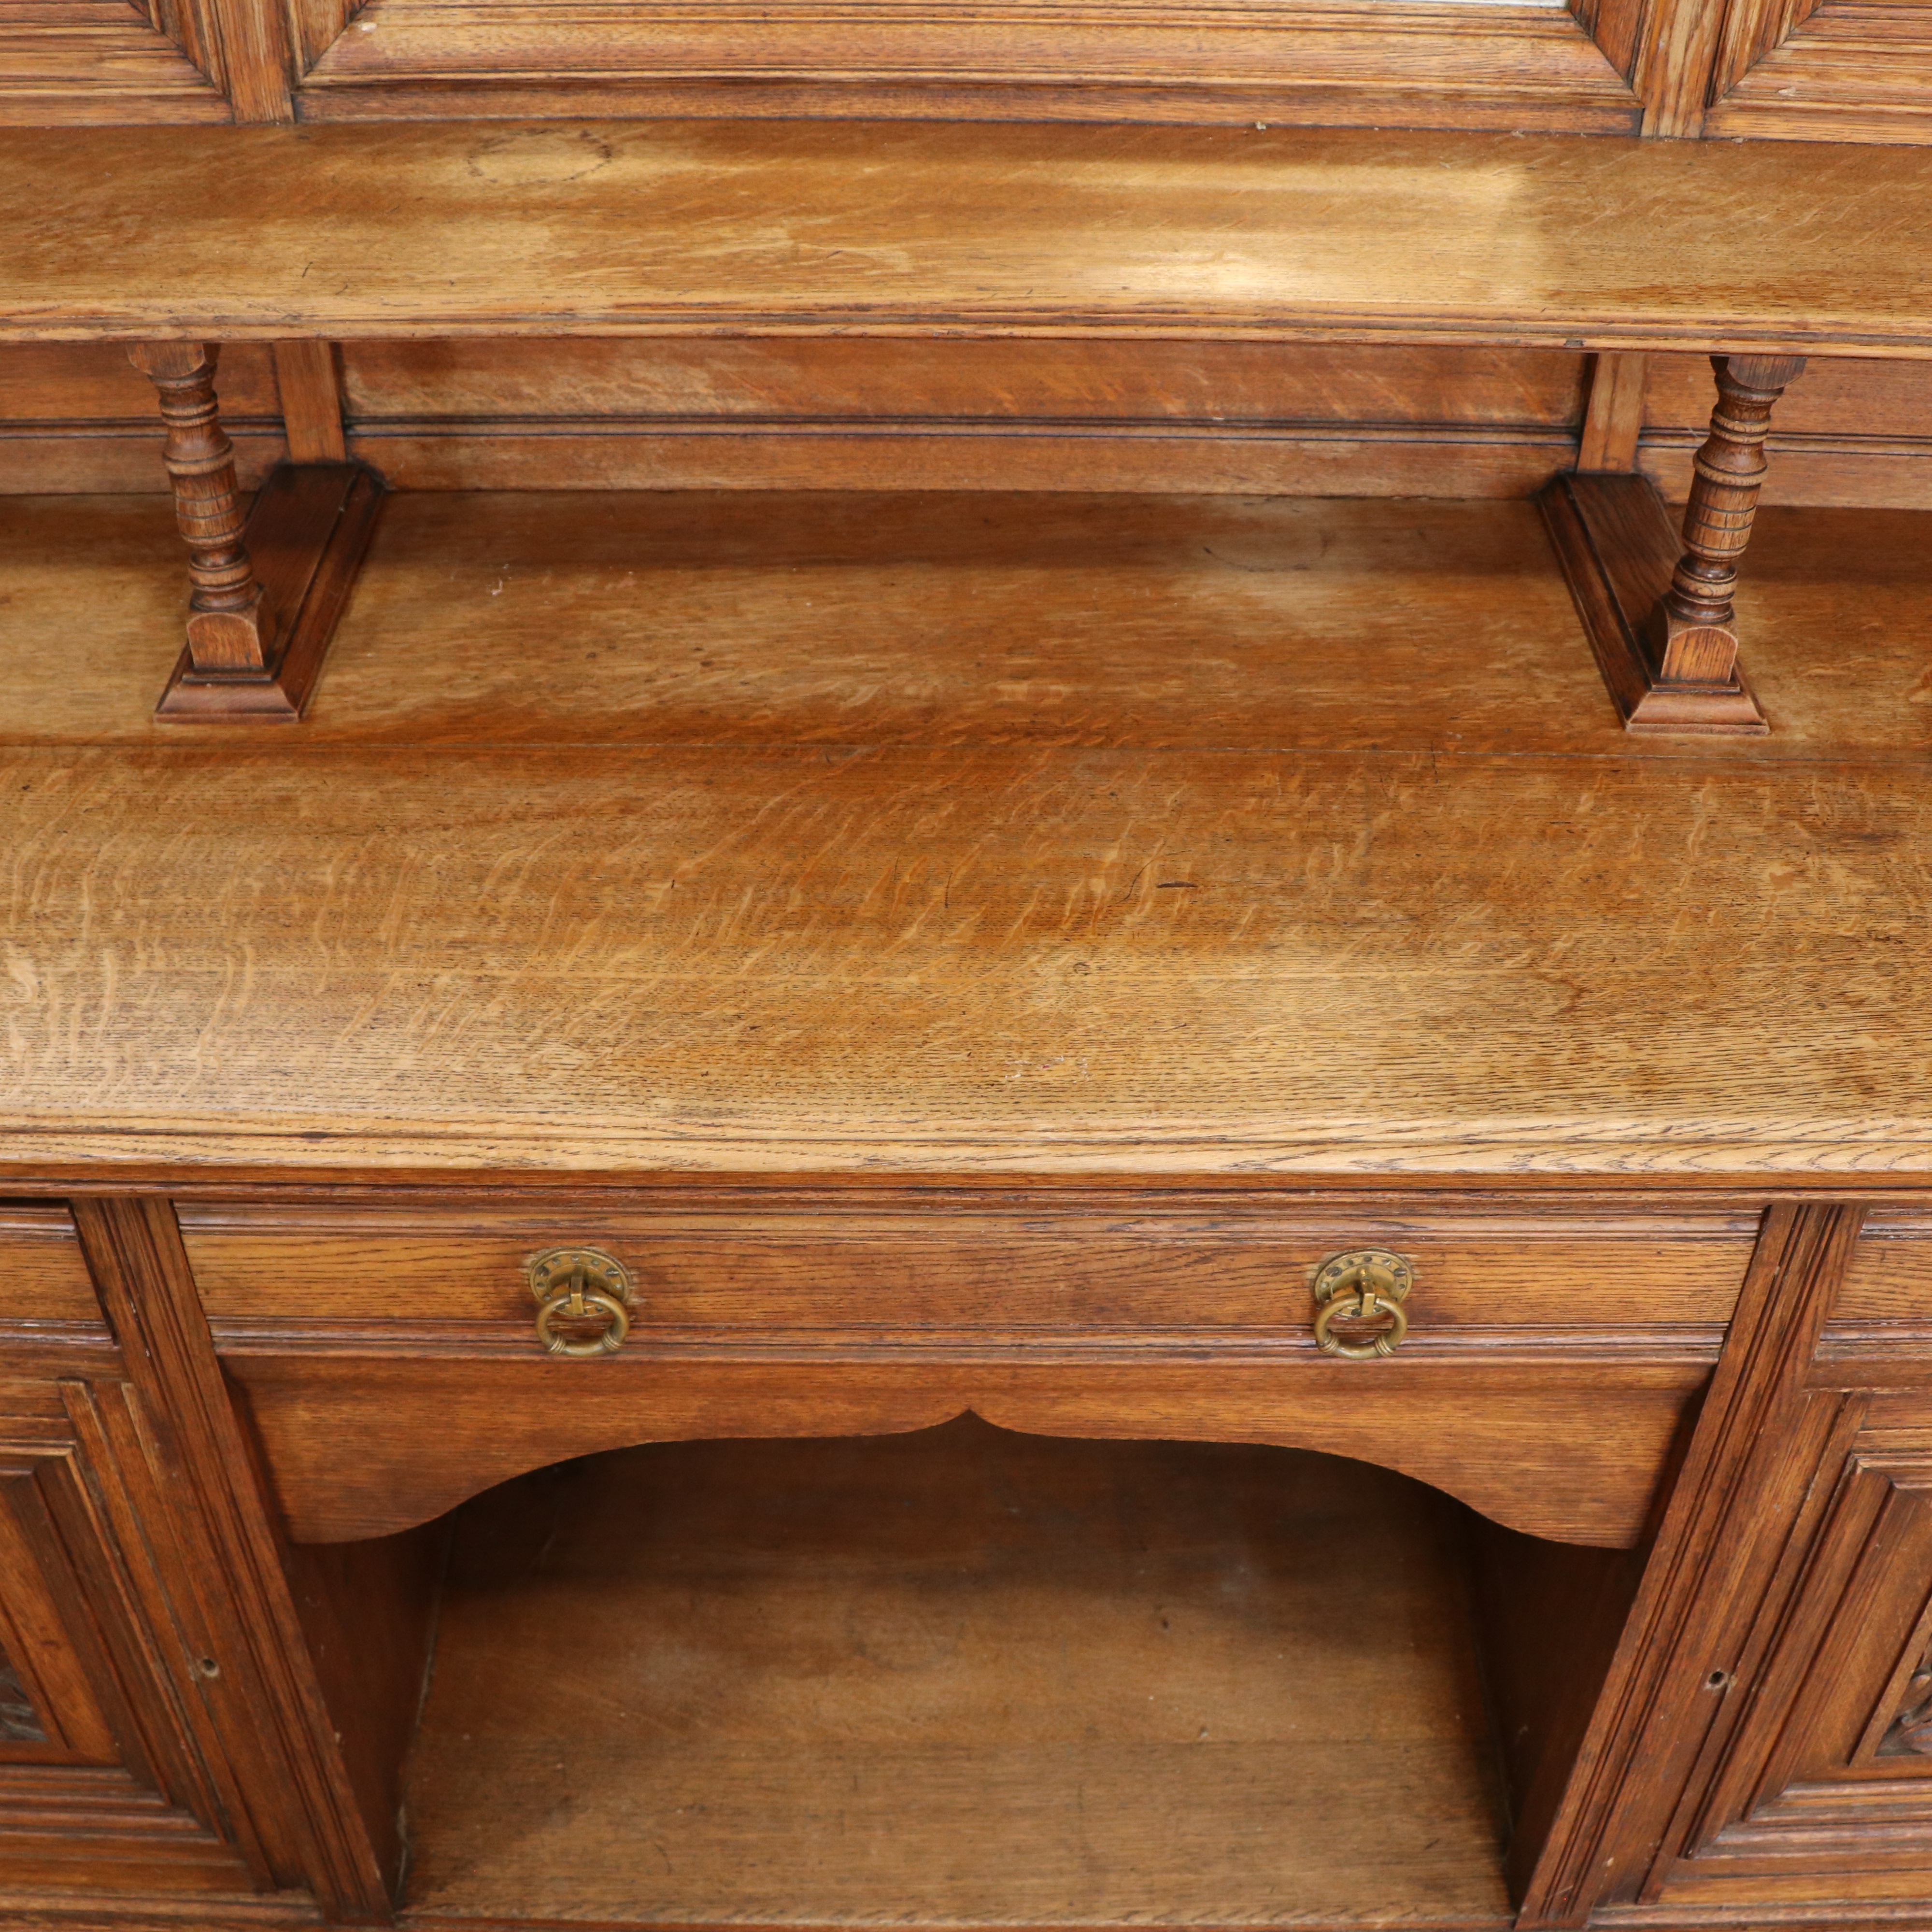 A late / early 20th Century mirror-backed oak sideboard, 204 cm x 63 cm x 196 cm high - Image 5 of 5